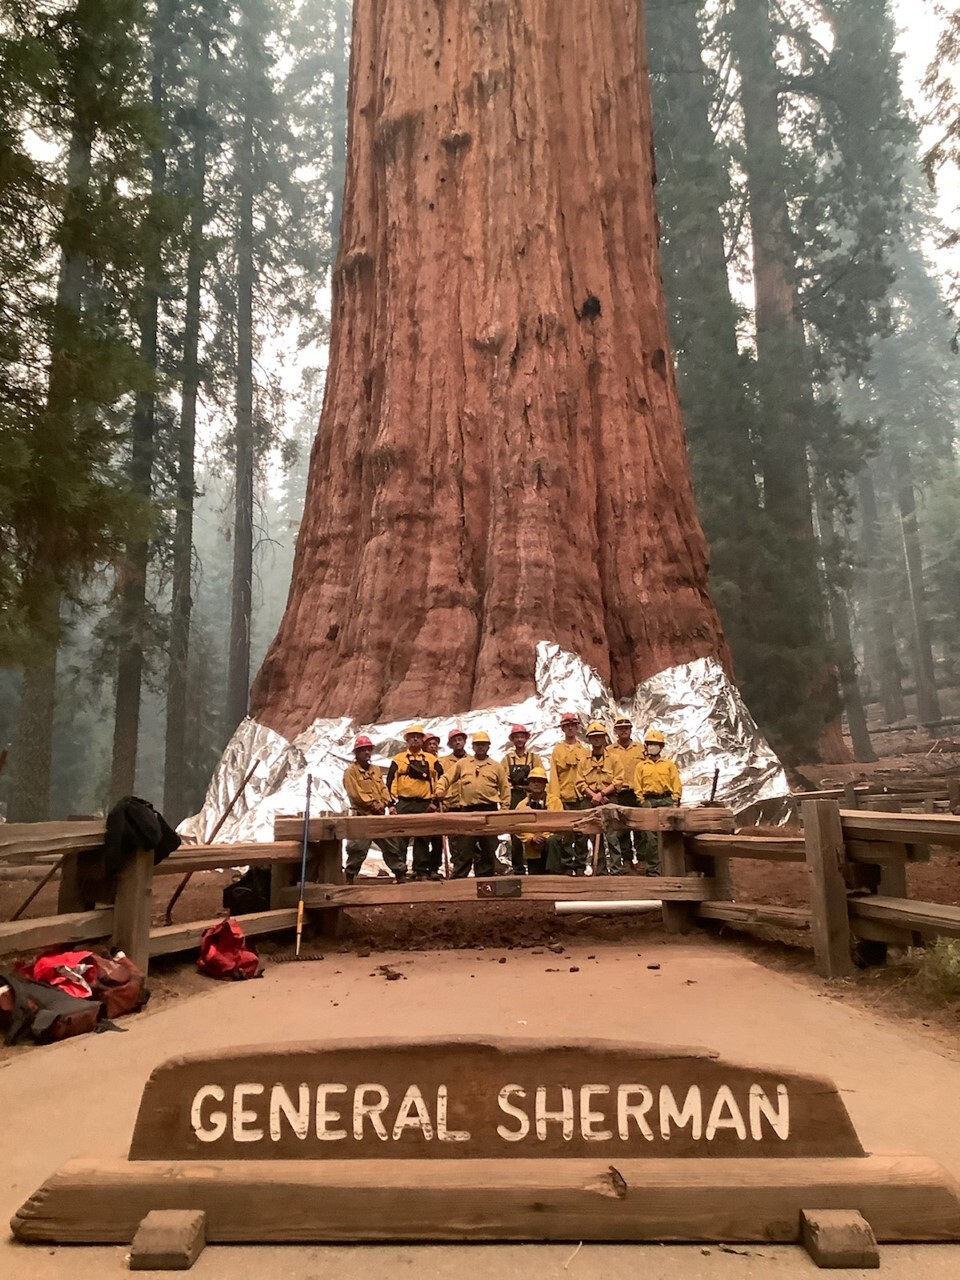 Sequoia National Park's General Sherman tree, one of largest in the world, still safe amid growing wildfire